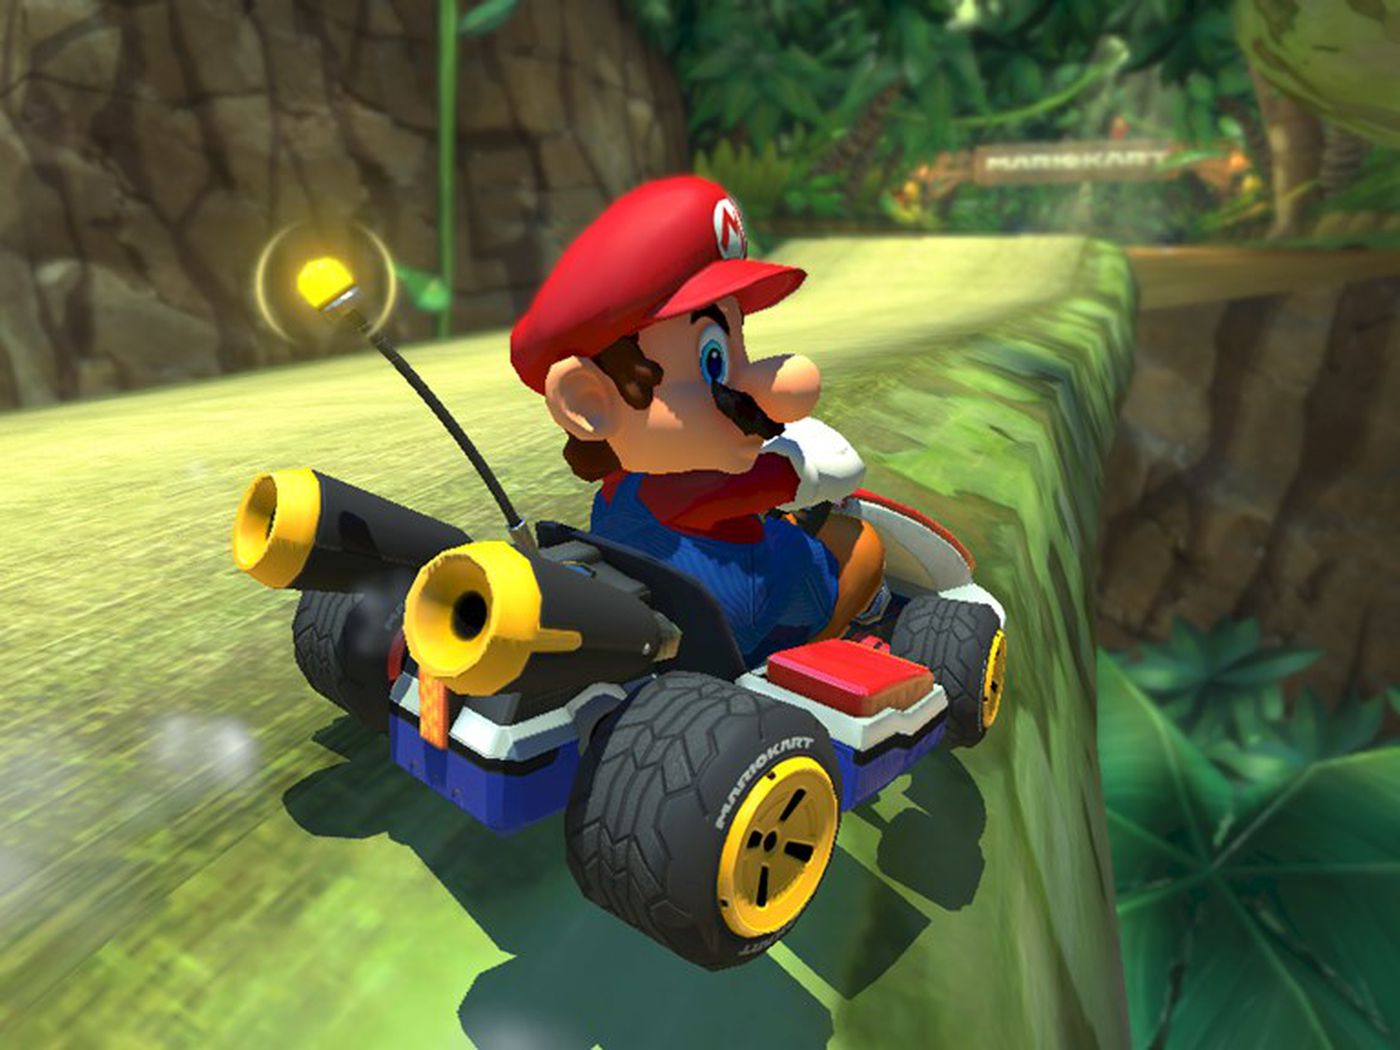 Mario Kart 8 Deluxe shows off just how much better the Switch is than Nintendo's other portable consoles